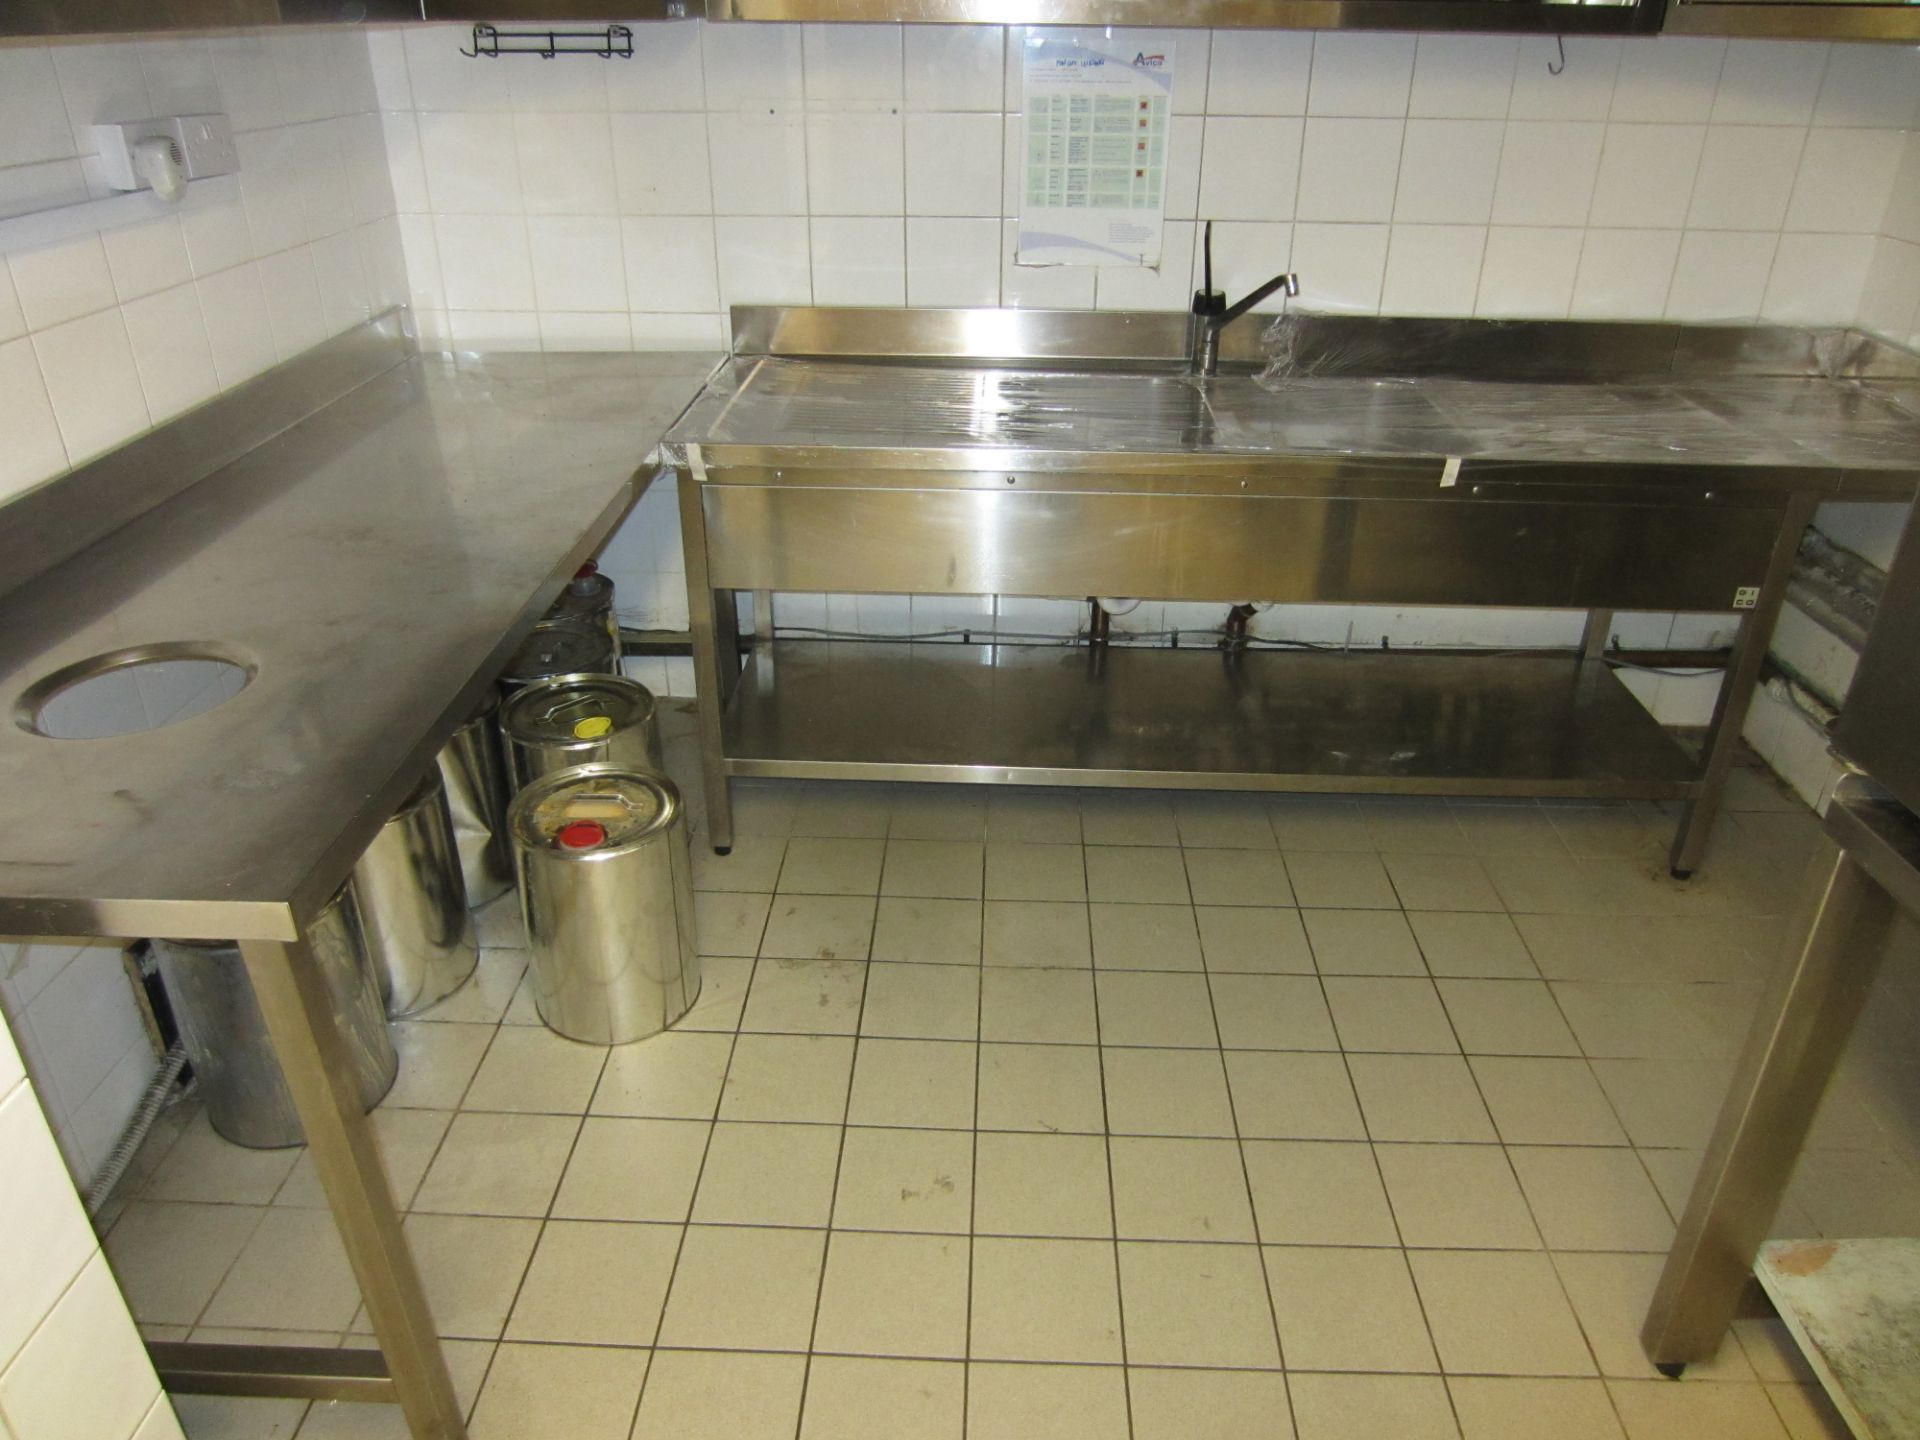 Gico Double Bowl, Double Drainer Sink With Lever Tap, Shelf Under With RH Table Extension - Image 2 of 2